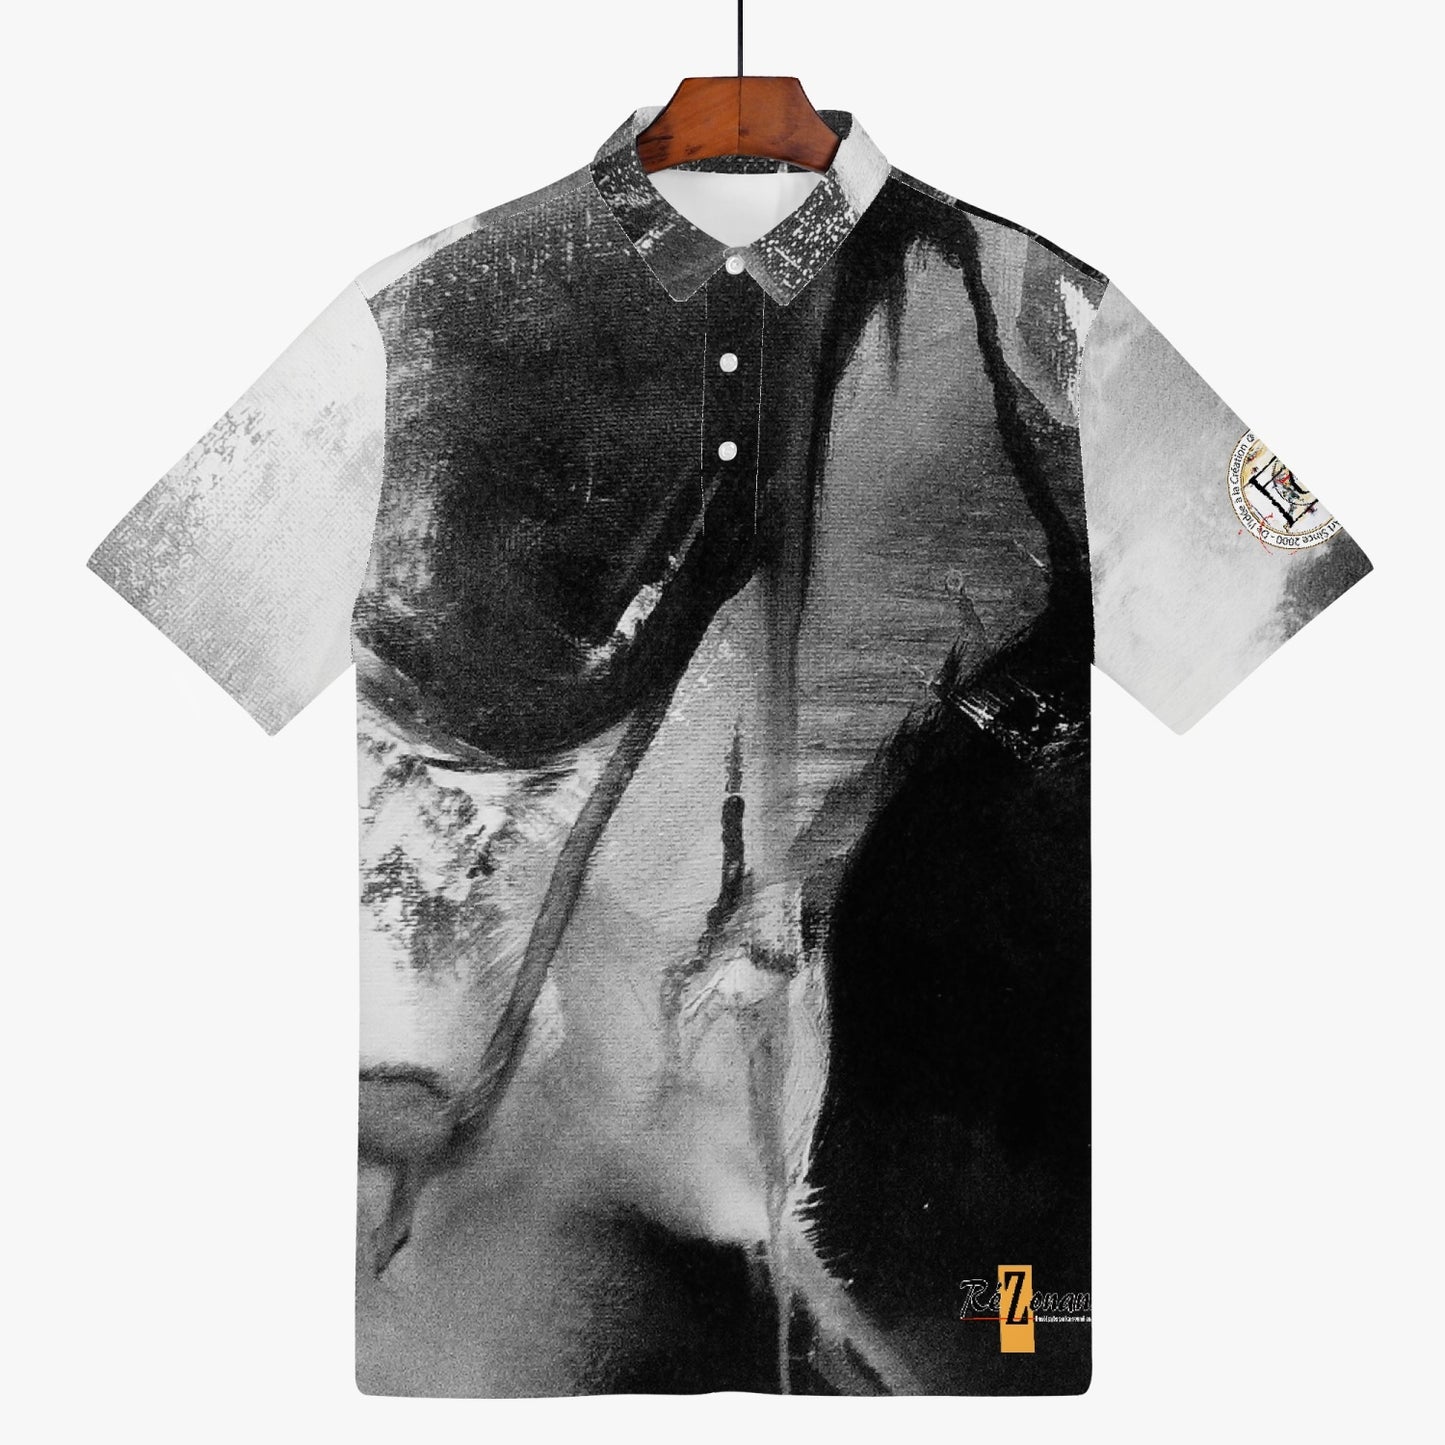 All-over polo shirt "Fèsanwòch"